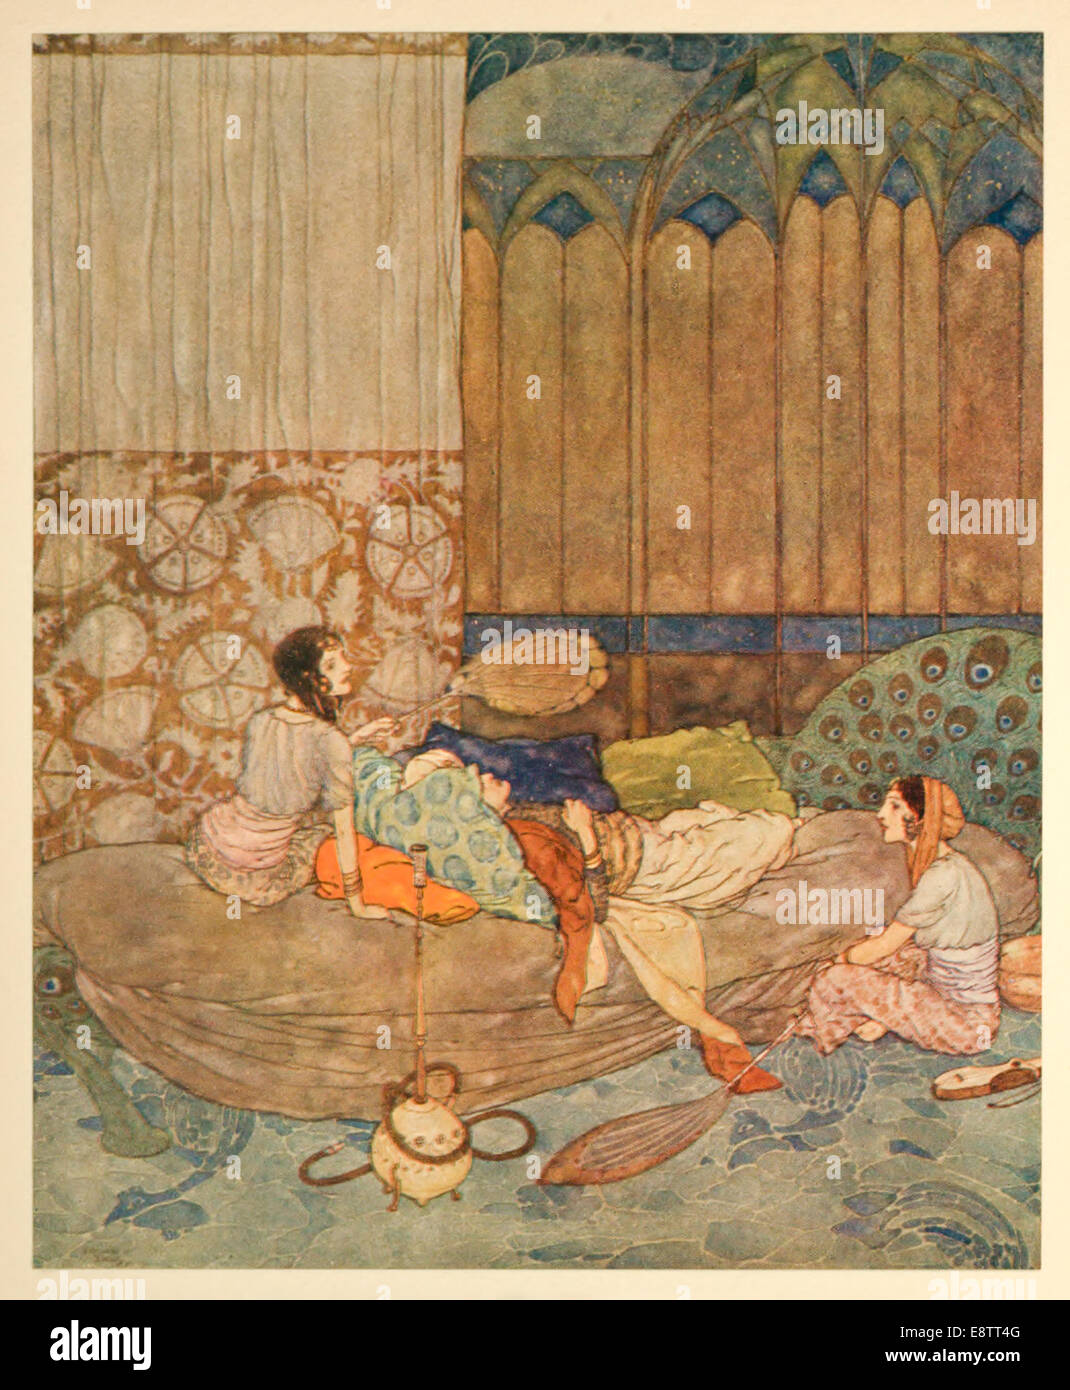 King of the Ebony Isles - Edmund Dulac illustration from ‘Stories from the Arabian nights’. See description for more information Stock Photo